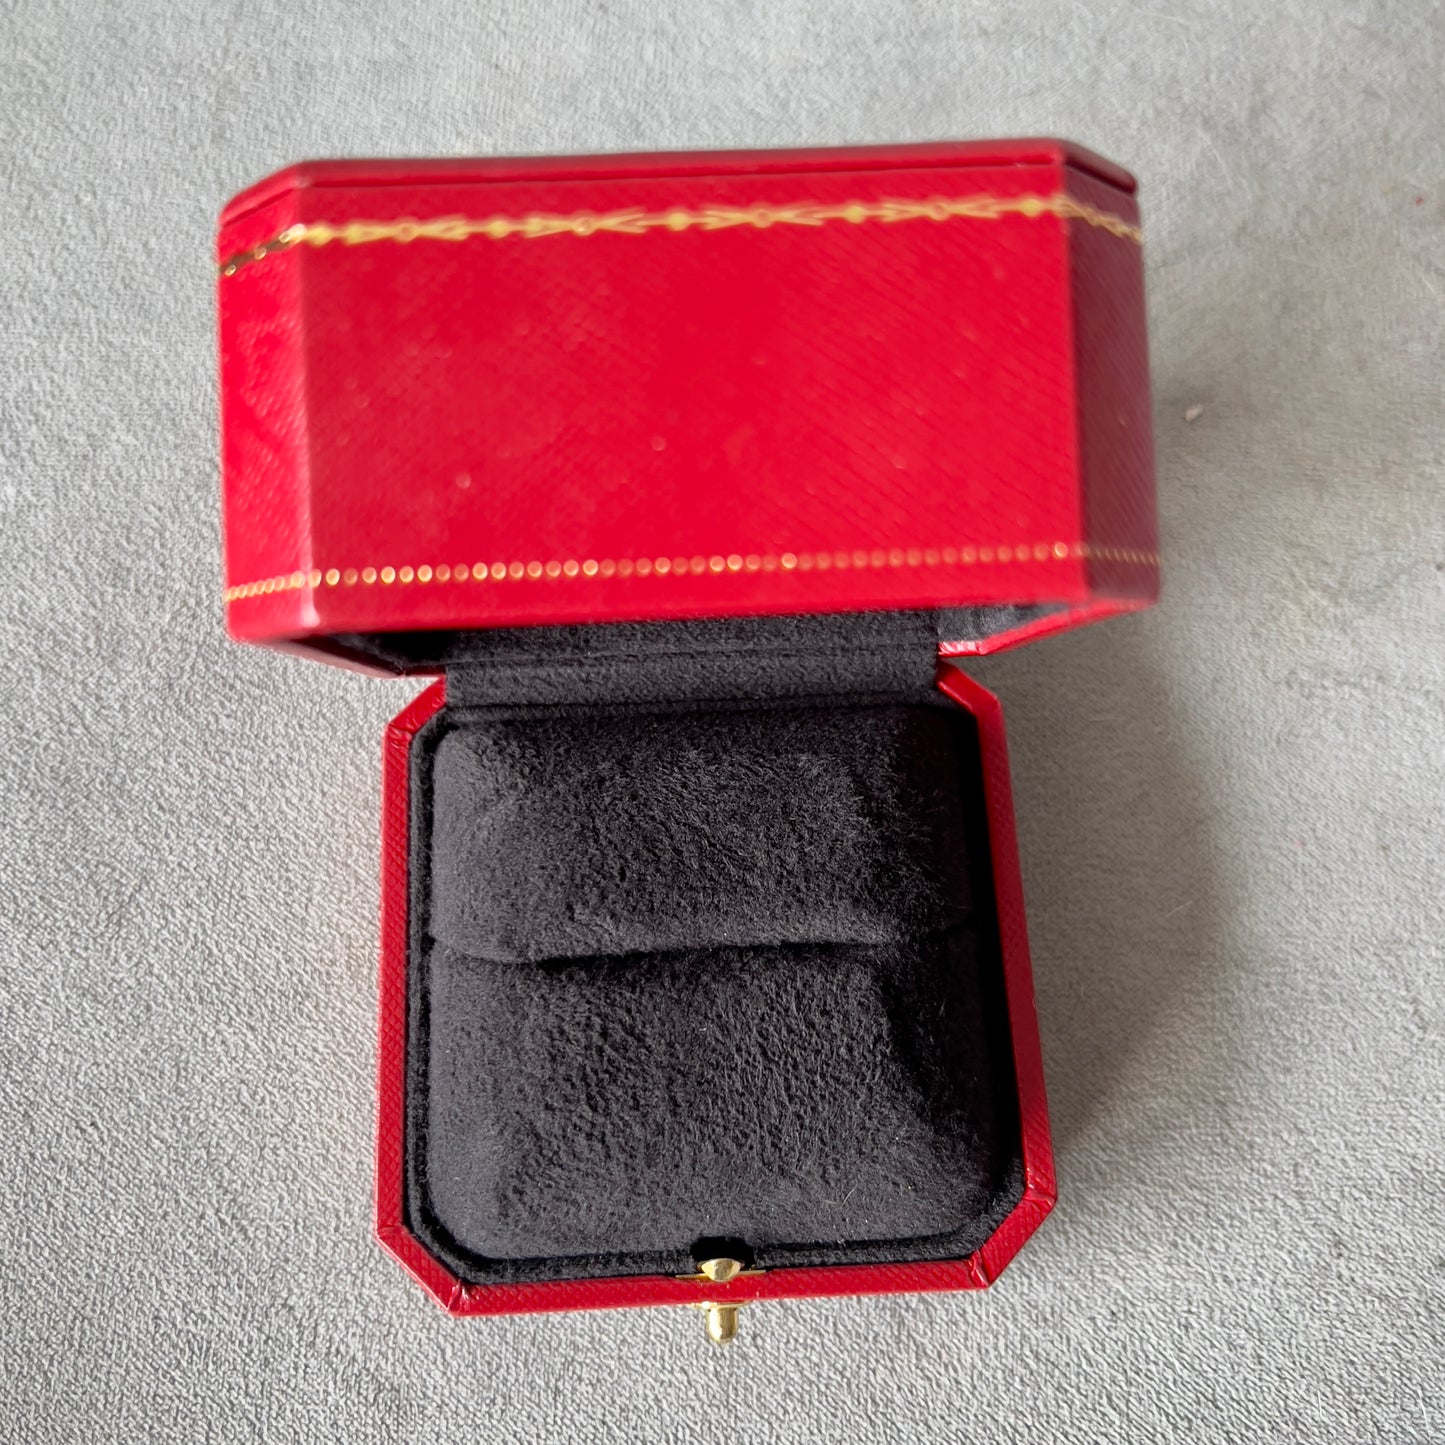 CARTIER Ring Box + Outer Box 3.40x3.25x2.40 inches